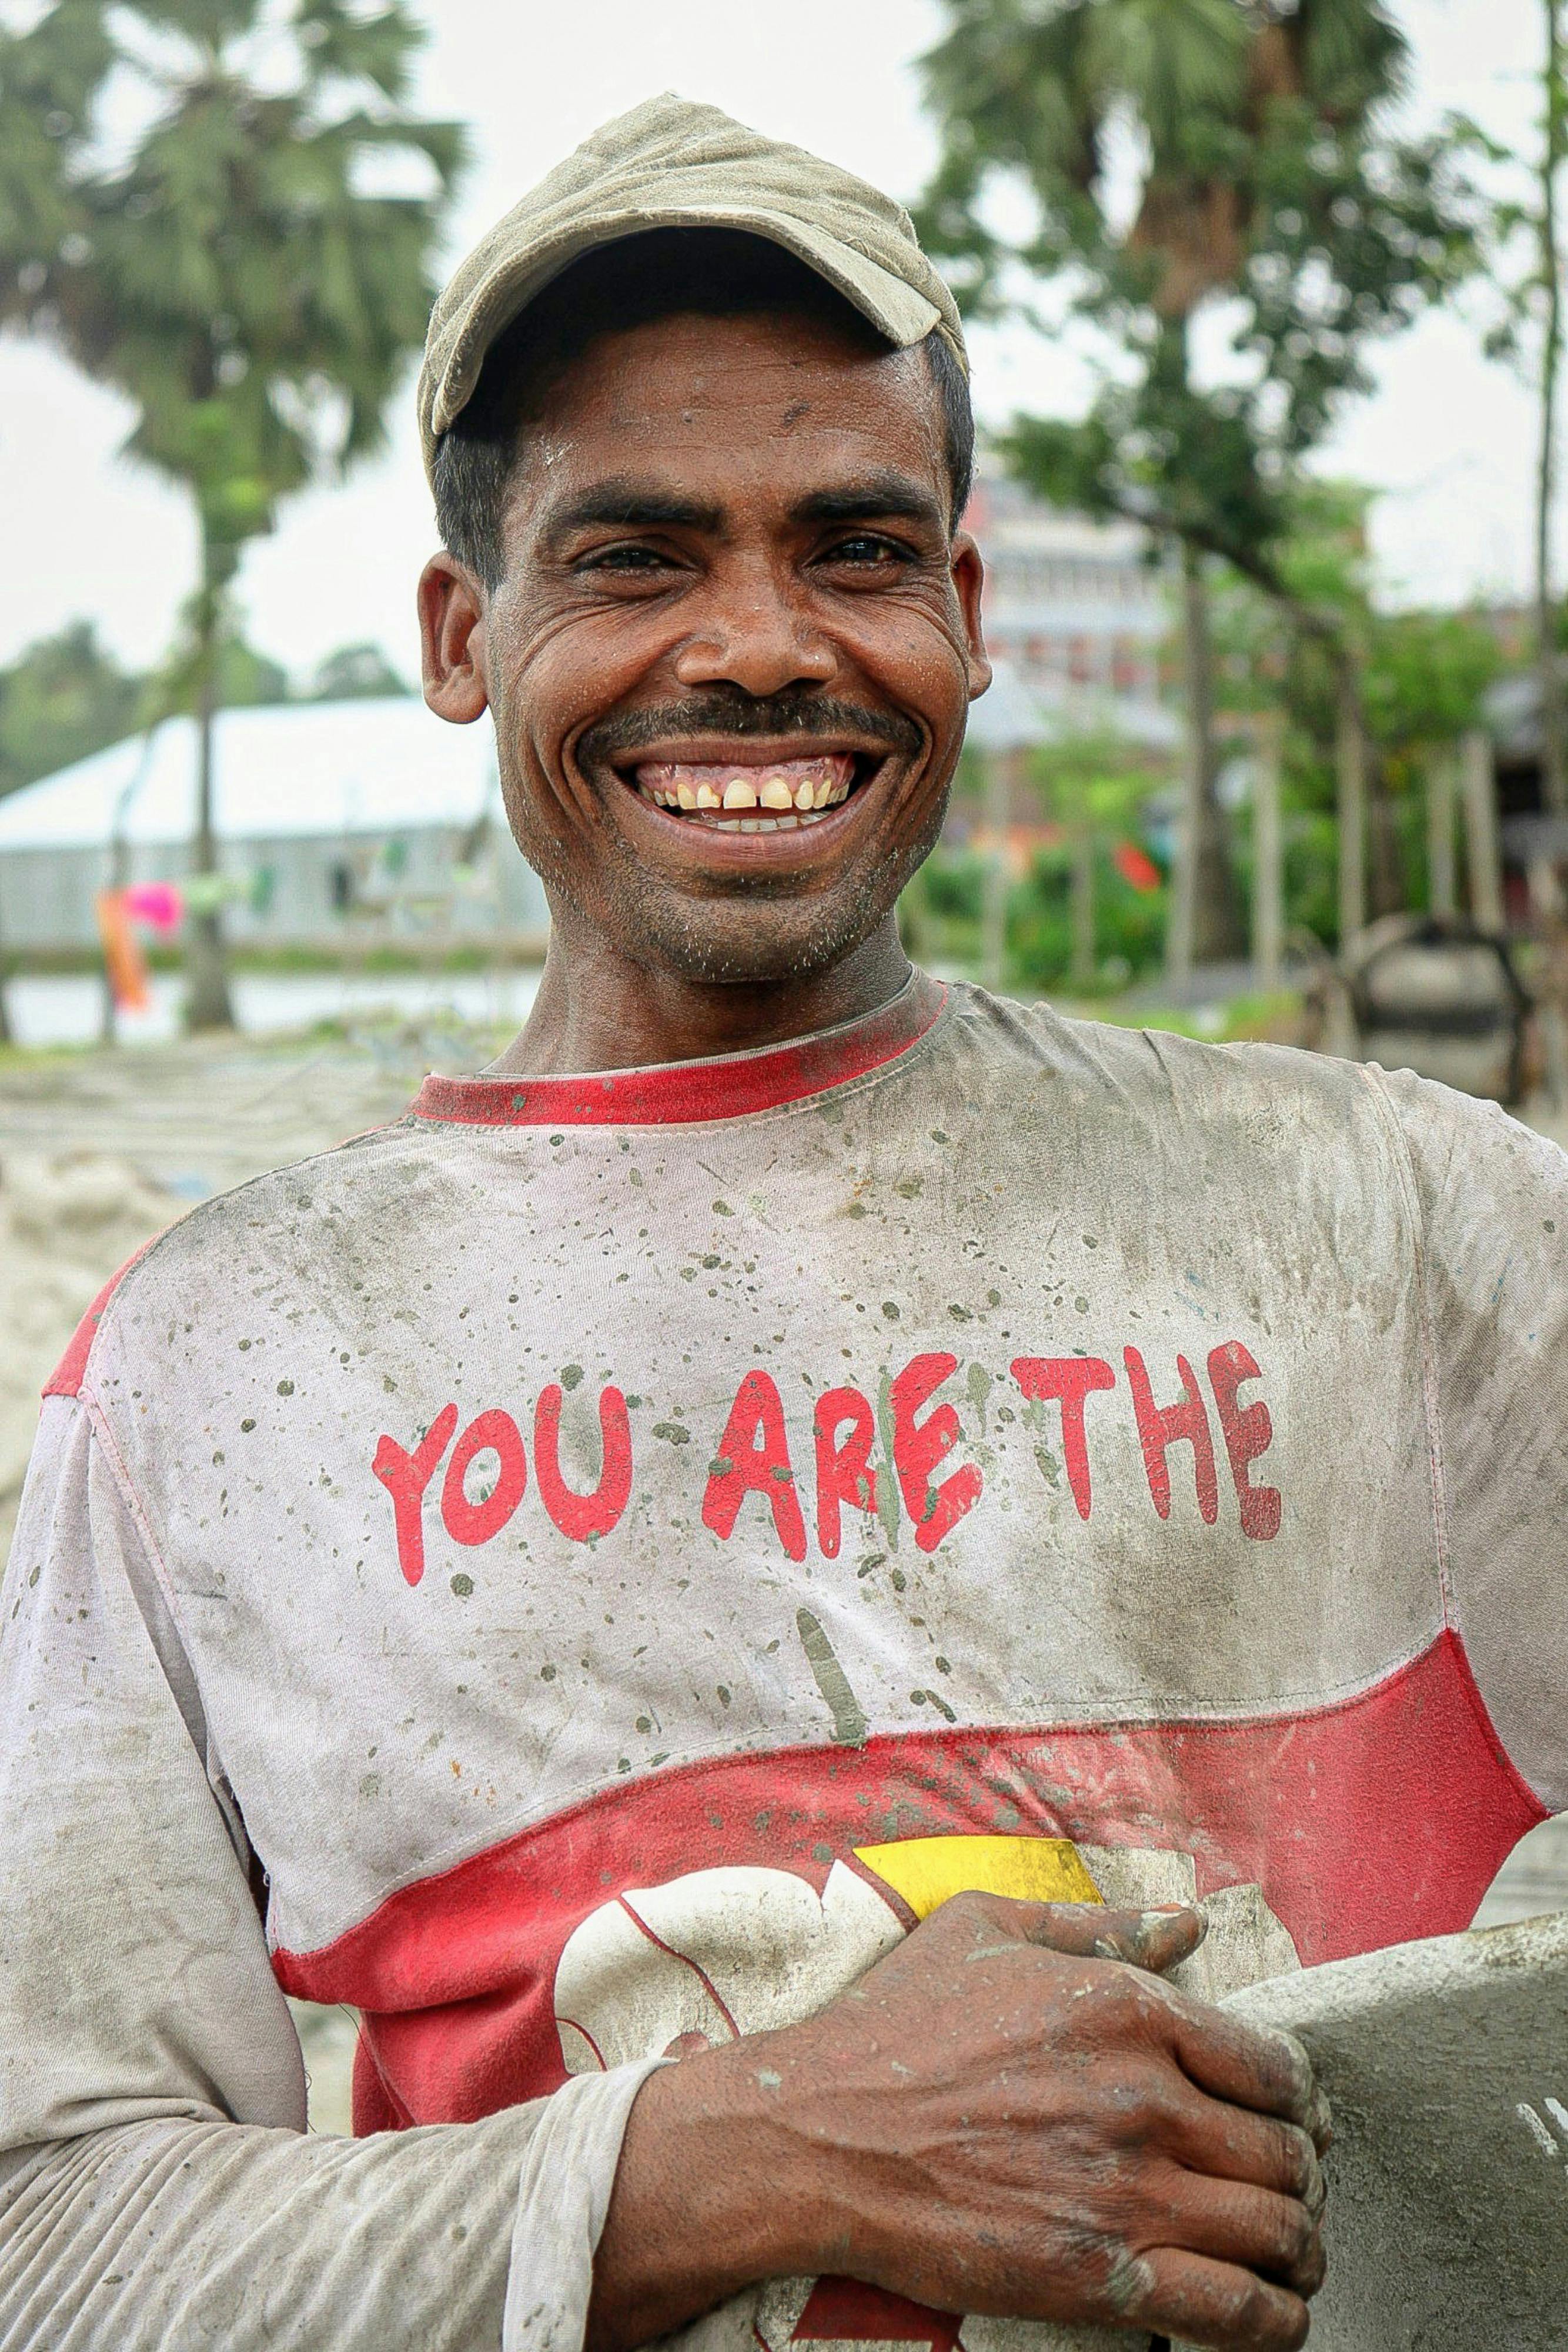 Smiling ethnic man in dirty clothes working on sandy seashore